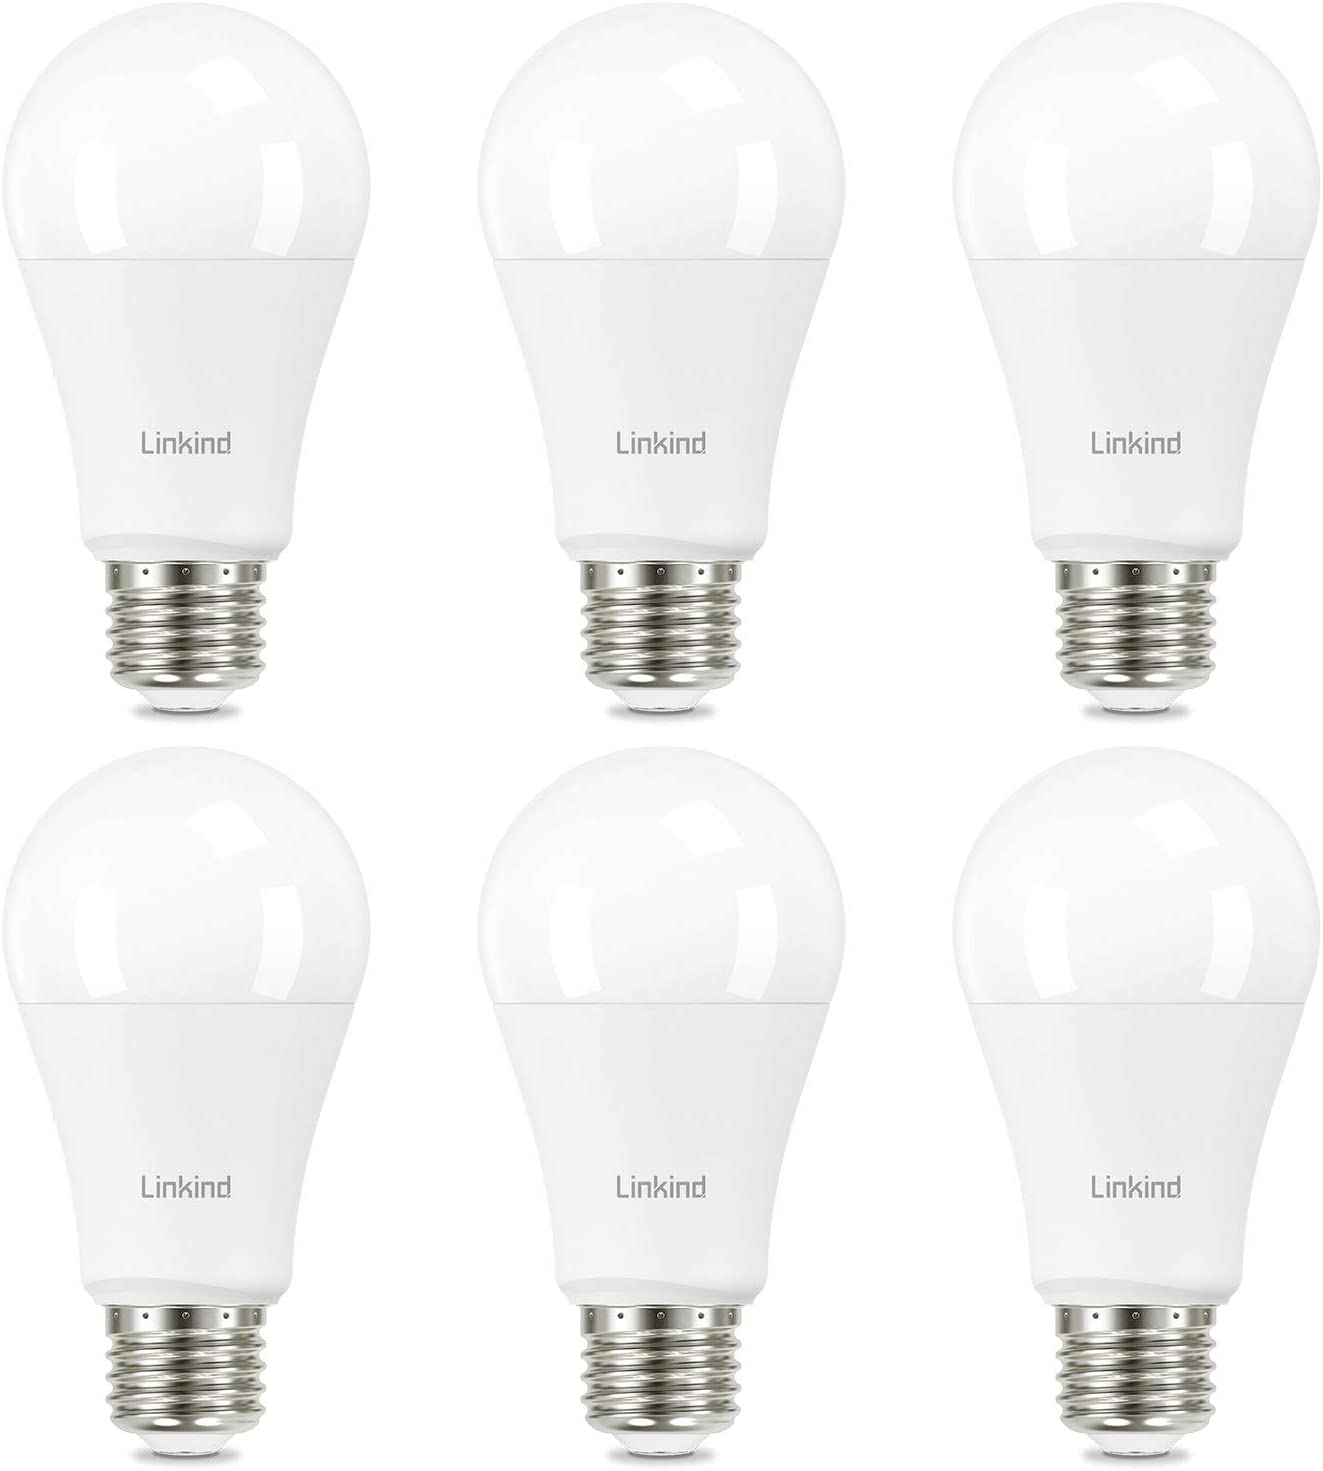 60W Equivalent, Linkind A19 LED Light Bulb, 9W 2700K Soft White, 800 Lumens, E26 Base Non-Dimmable LED Light Bulb, Standard Replacement, UL Listed, 6-Pack